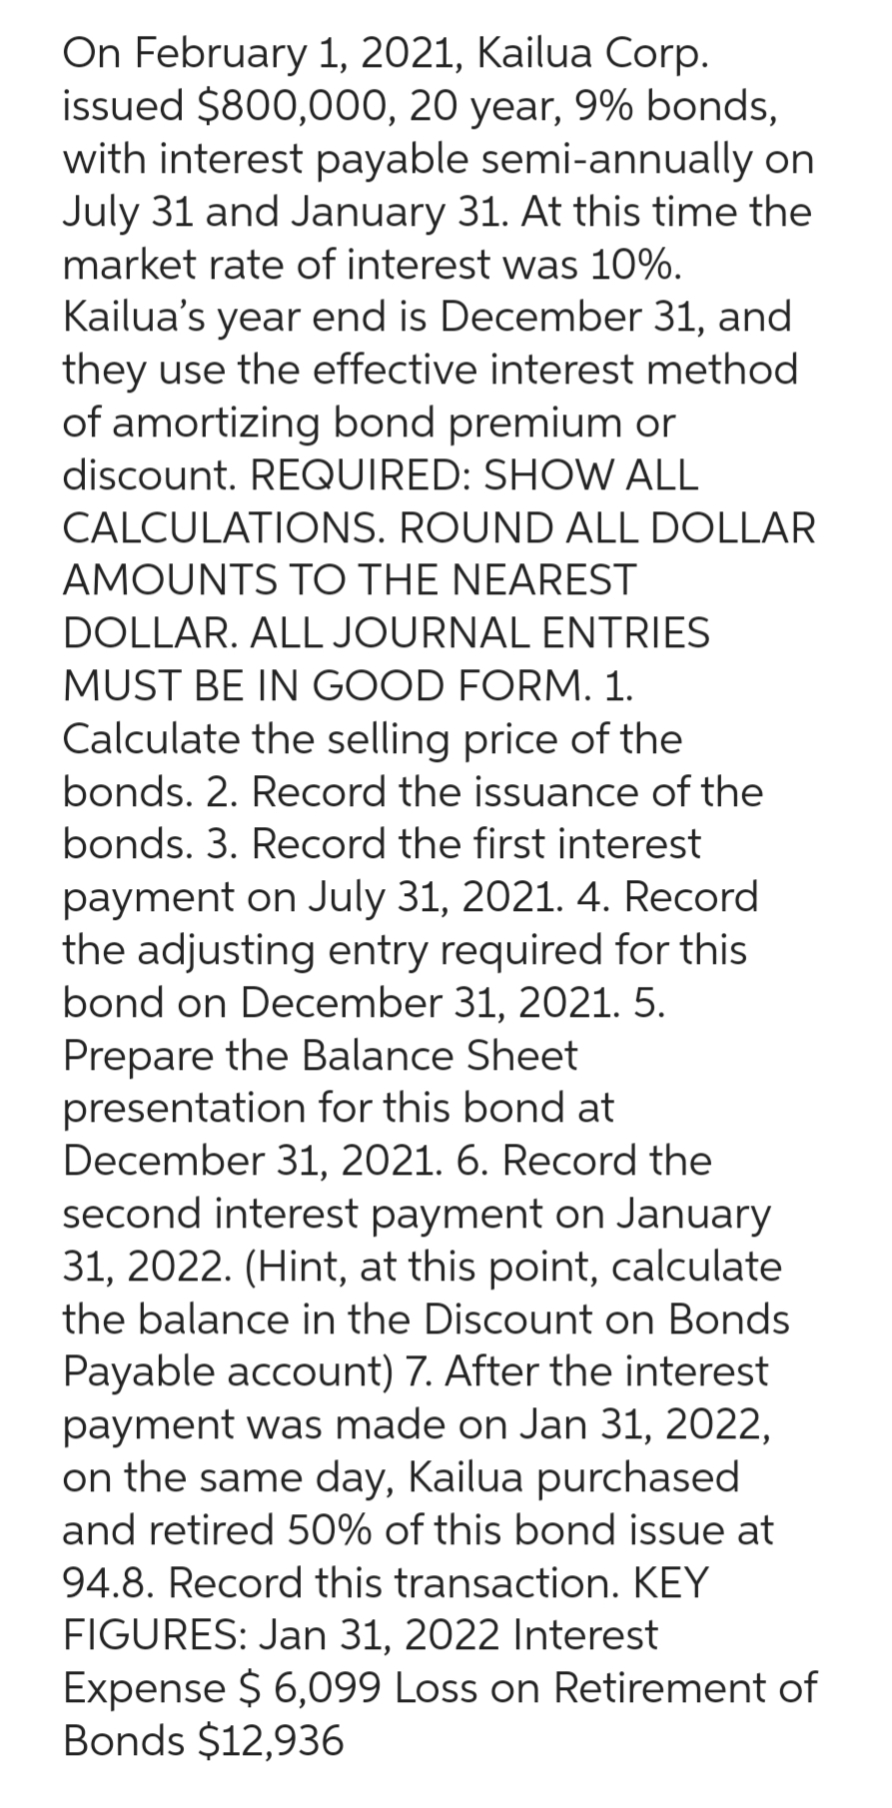 On February 1, 2021, Kailua Corp.
issued $800,000, 20 year, 9% bonds,
with interest payable semi-annually on
July 31 and January 31. At this time the
market rate of interest was 10%.
Kailua's year end is December 31, and
they use the effective interest method
of amortizing bond premium or
discount. REQUIRED: SHOW ALL
CALCULATIONS. ROUND ALL DOLLAR
AMOUNTS TO THE NEAREST
DOLLAR. ALL JOURNAL ENTRIES
MUST BE IN GOOD FORM. 1.
Calculate the selling price of the
bonds. 2. Record the issuance of the
bonds. 3. Record the first interest
payment on July 31, 2021. 4. Record
the adjusting entry required for this
bond on December 31, 2021. 5.
Prepare the Balance Sheet
presentation for this bond at
December 31, 2021. 6. Record the
second interest payment on January
31, 2022. (Hint, at this point, calculate
the balance in the Discount on Bonds
Payable account) 7. After the interest
payment was made on Jan 31, 2022,
on the same day, Kailua purchased
and retired 50% of this bond issue at
94.8. Record this transaction. KEY
FIGURES: Jan 31, 2022 Interest
Expense $ 6,099 Loss on Retirement of
Bonds $12,936